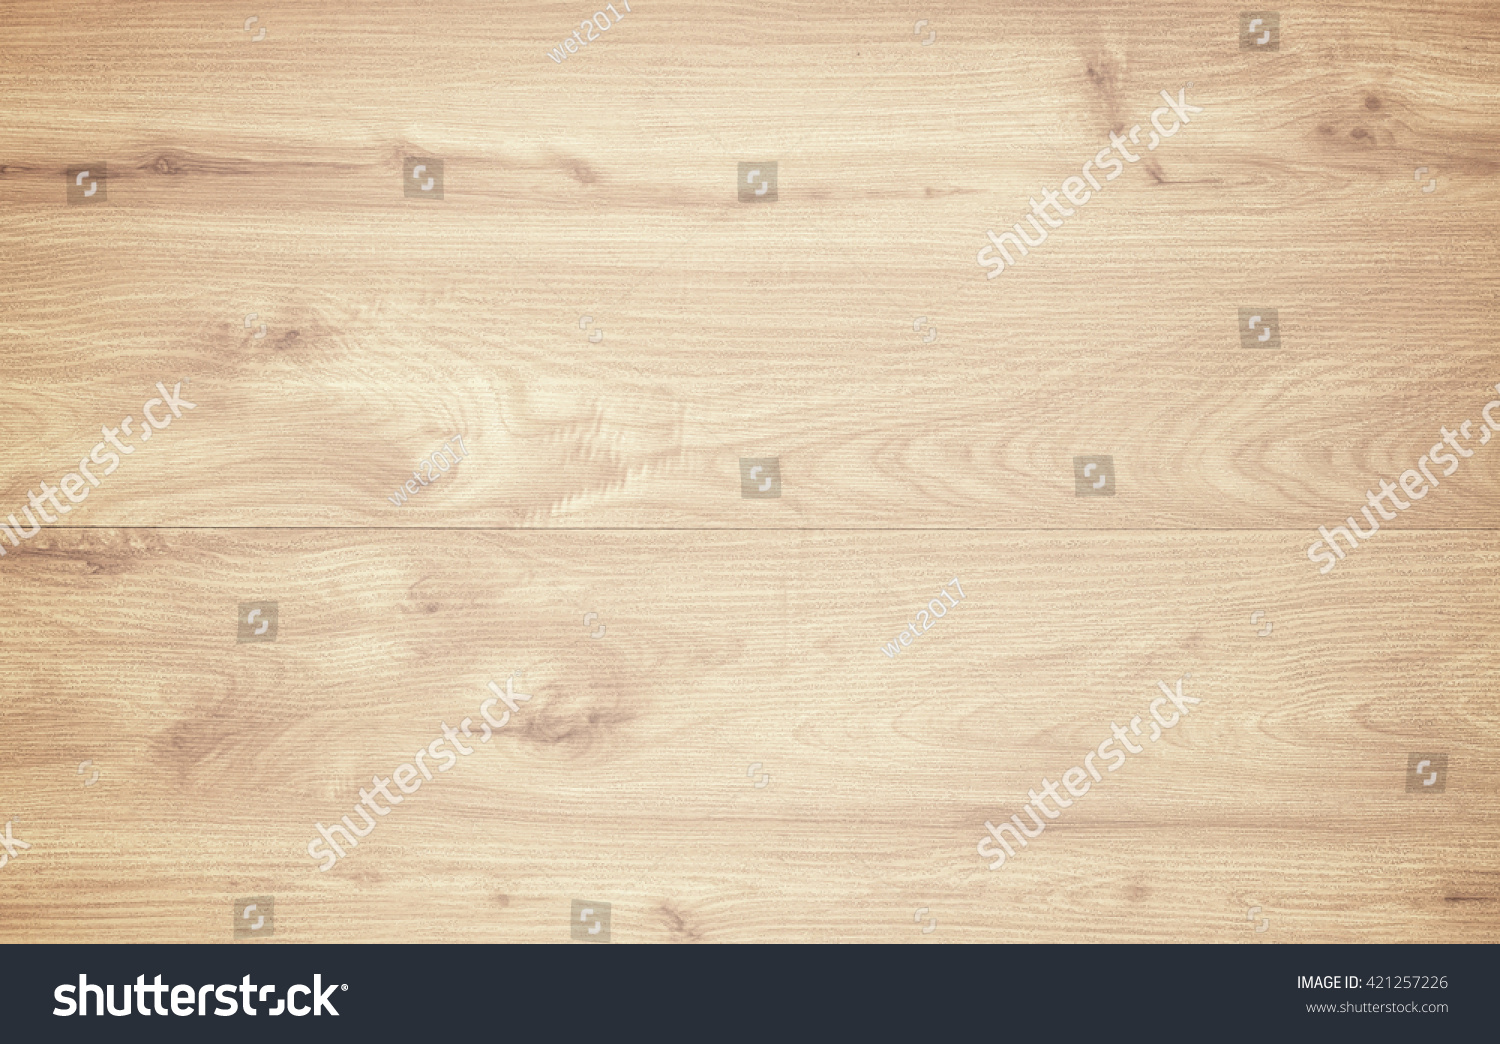 Hardwood maple basketball court floor viewed from above #421257226